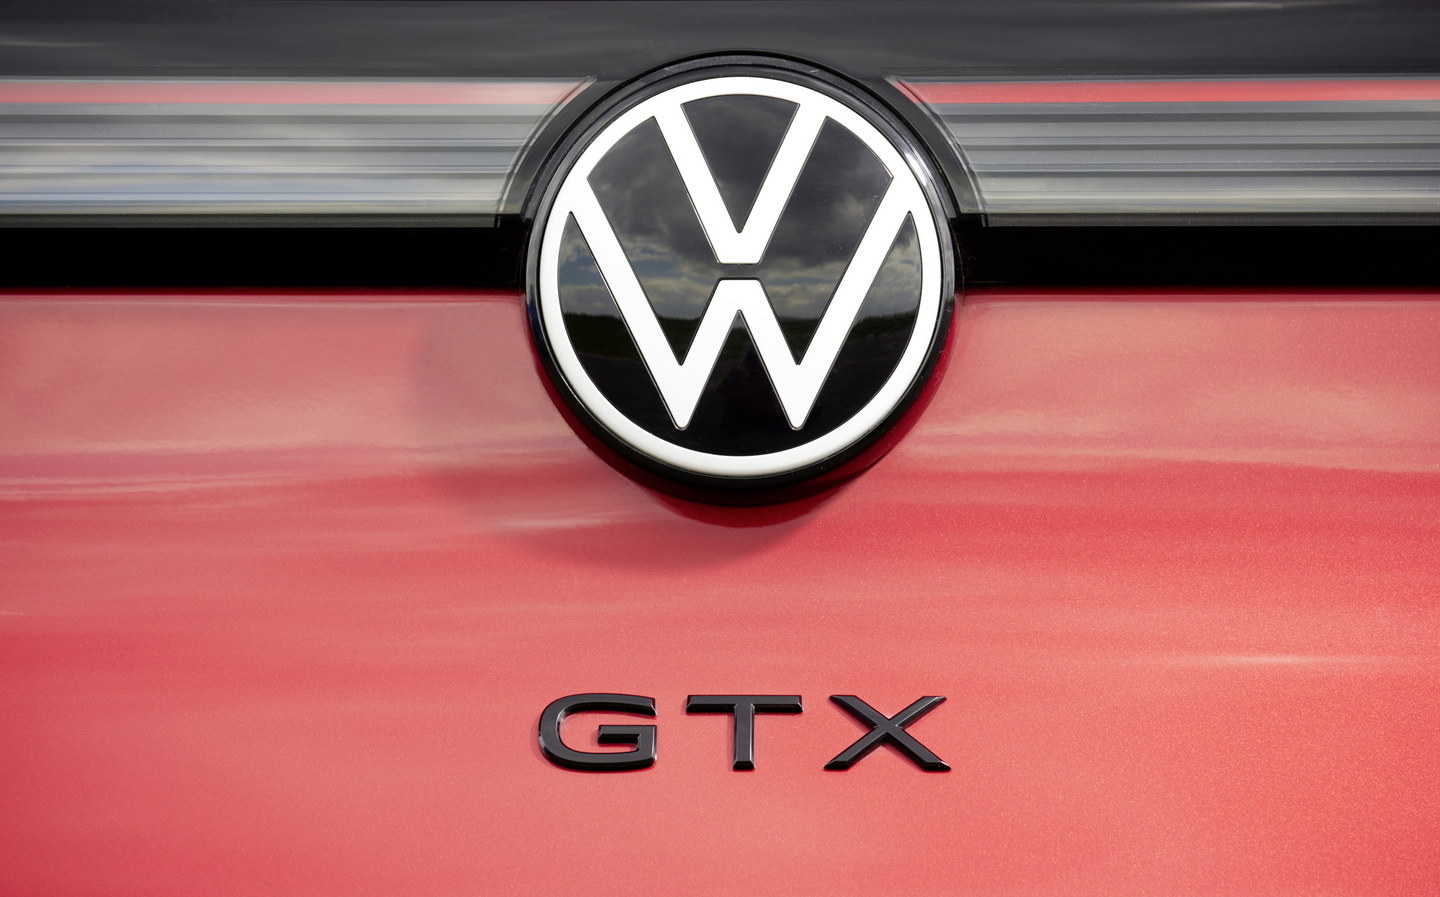 golf, golf r, id.2, id.3, volkswagen, volkswagen boss confirms golf and gti badges will live on in electric era